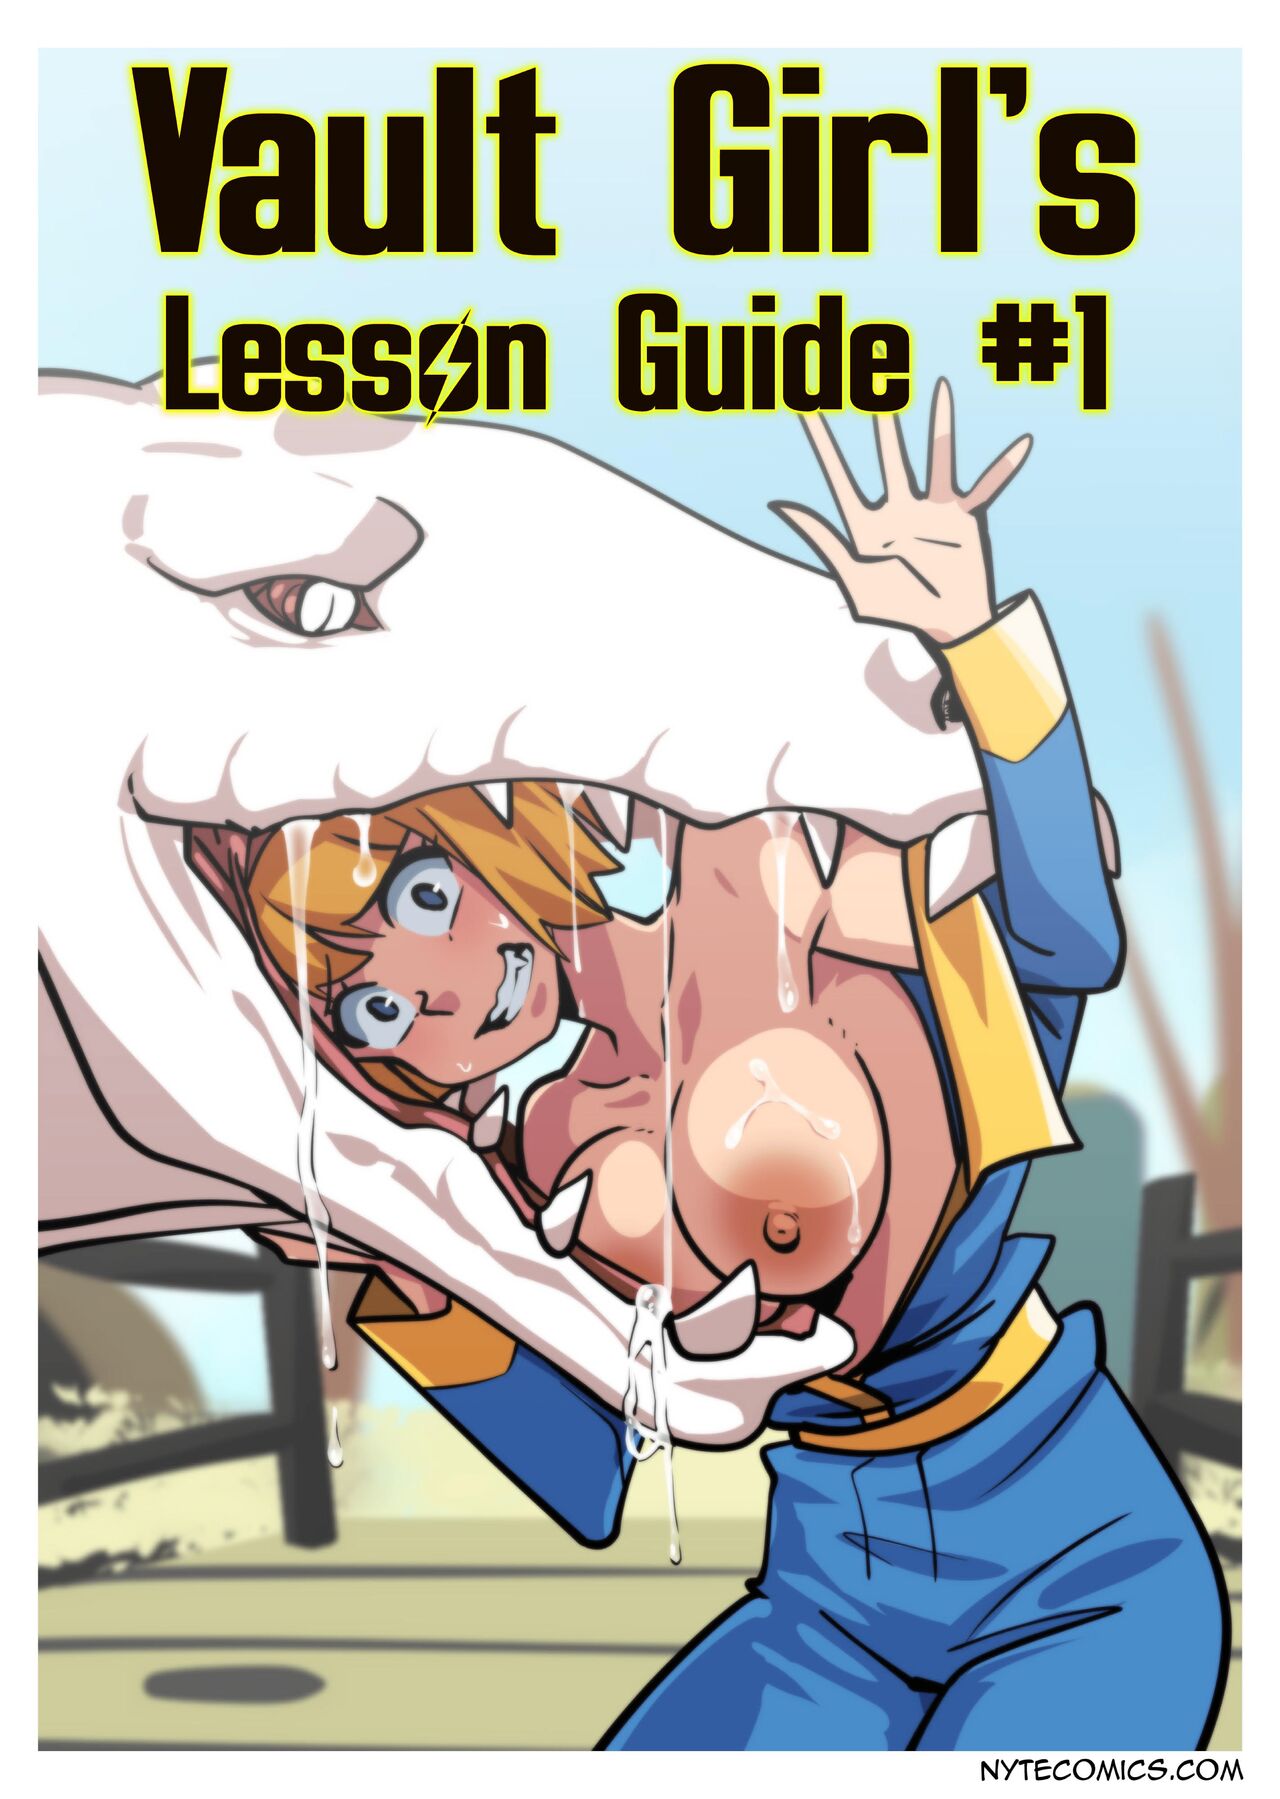 Fallout Vault Girl Porn - Vault Girl's lesson Guide #1 - Page 1 - HentaiEra